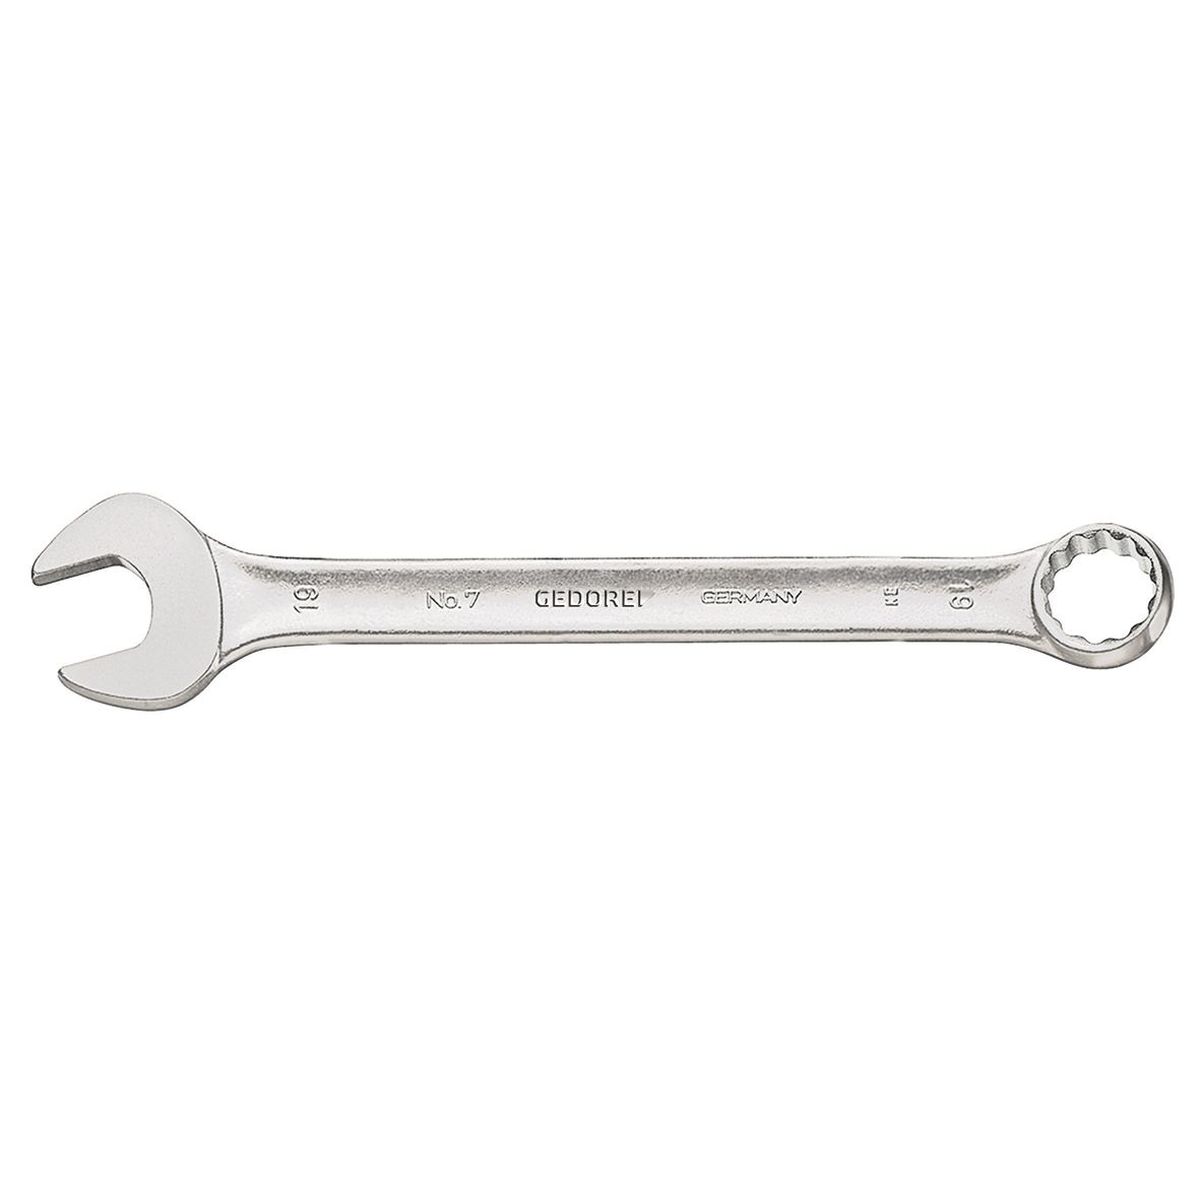 Combination spanner 13mm No.7 13 Gedore